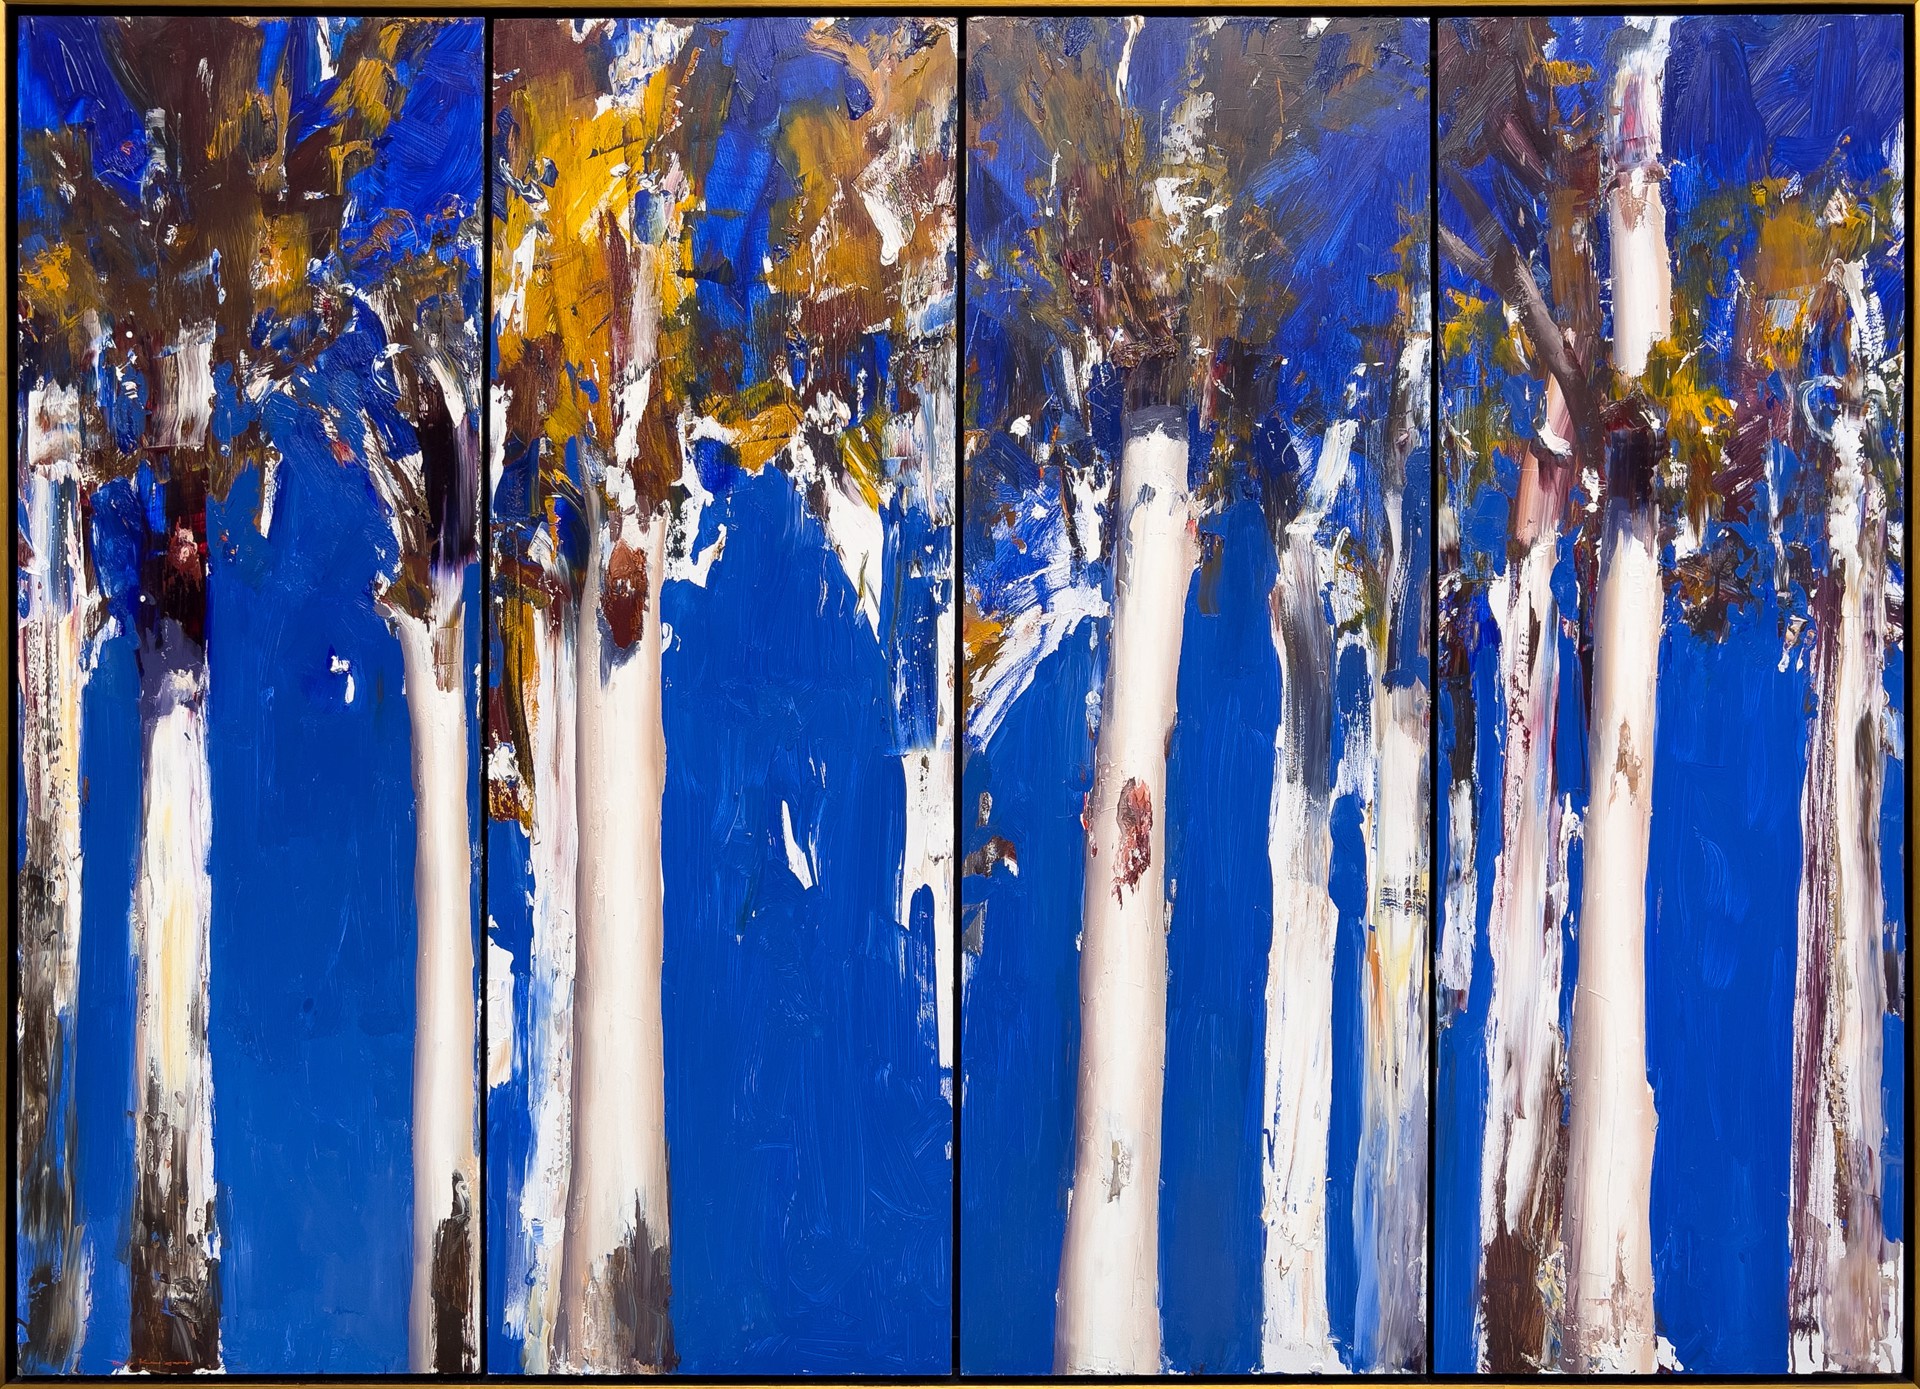 Scribbly Gums, Blue & Gold by Ken Knight